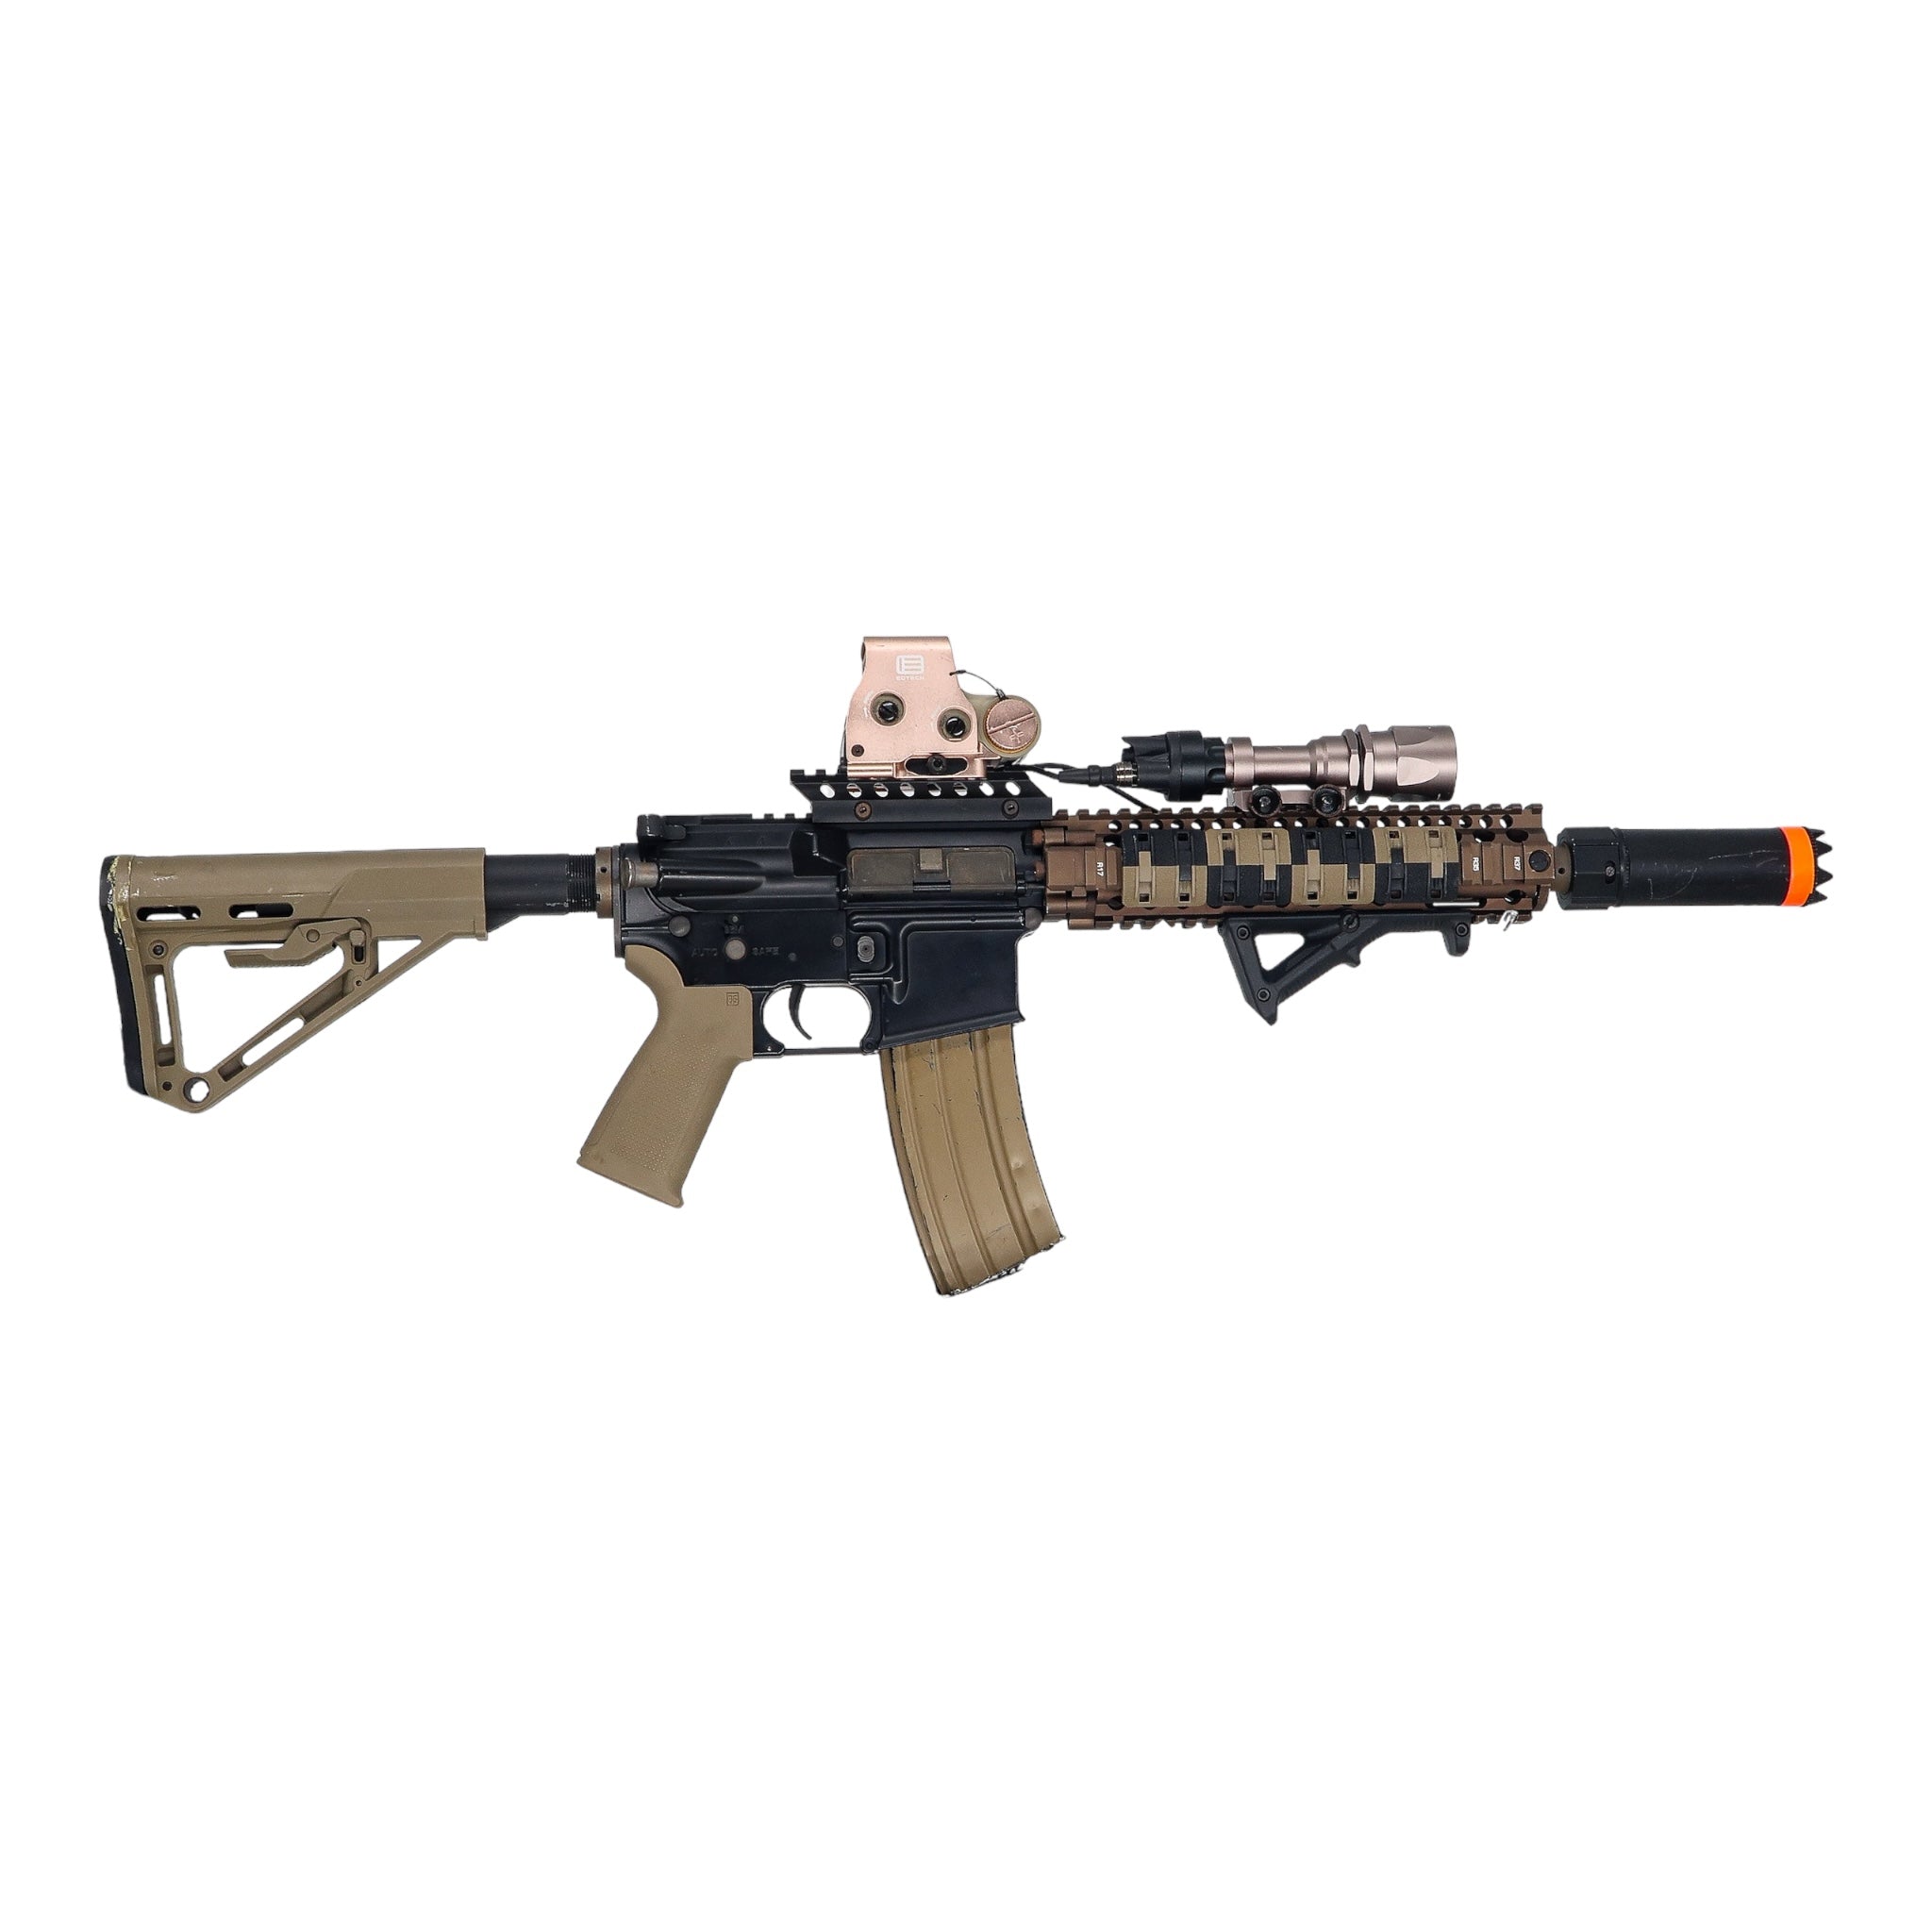 Pre-Owned Custom Colt M4 with Eotech